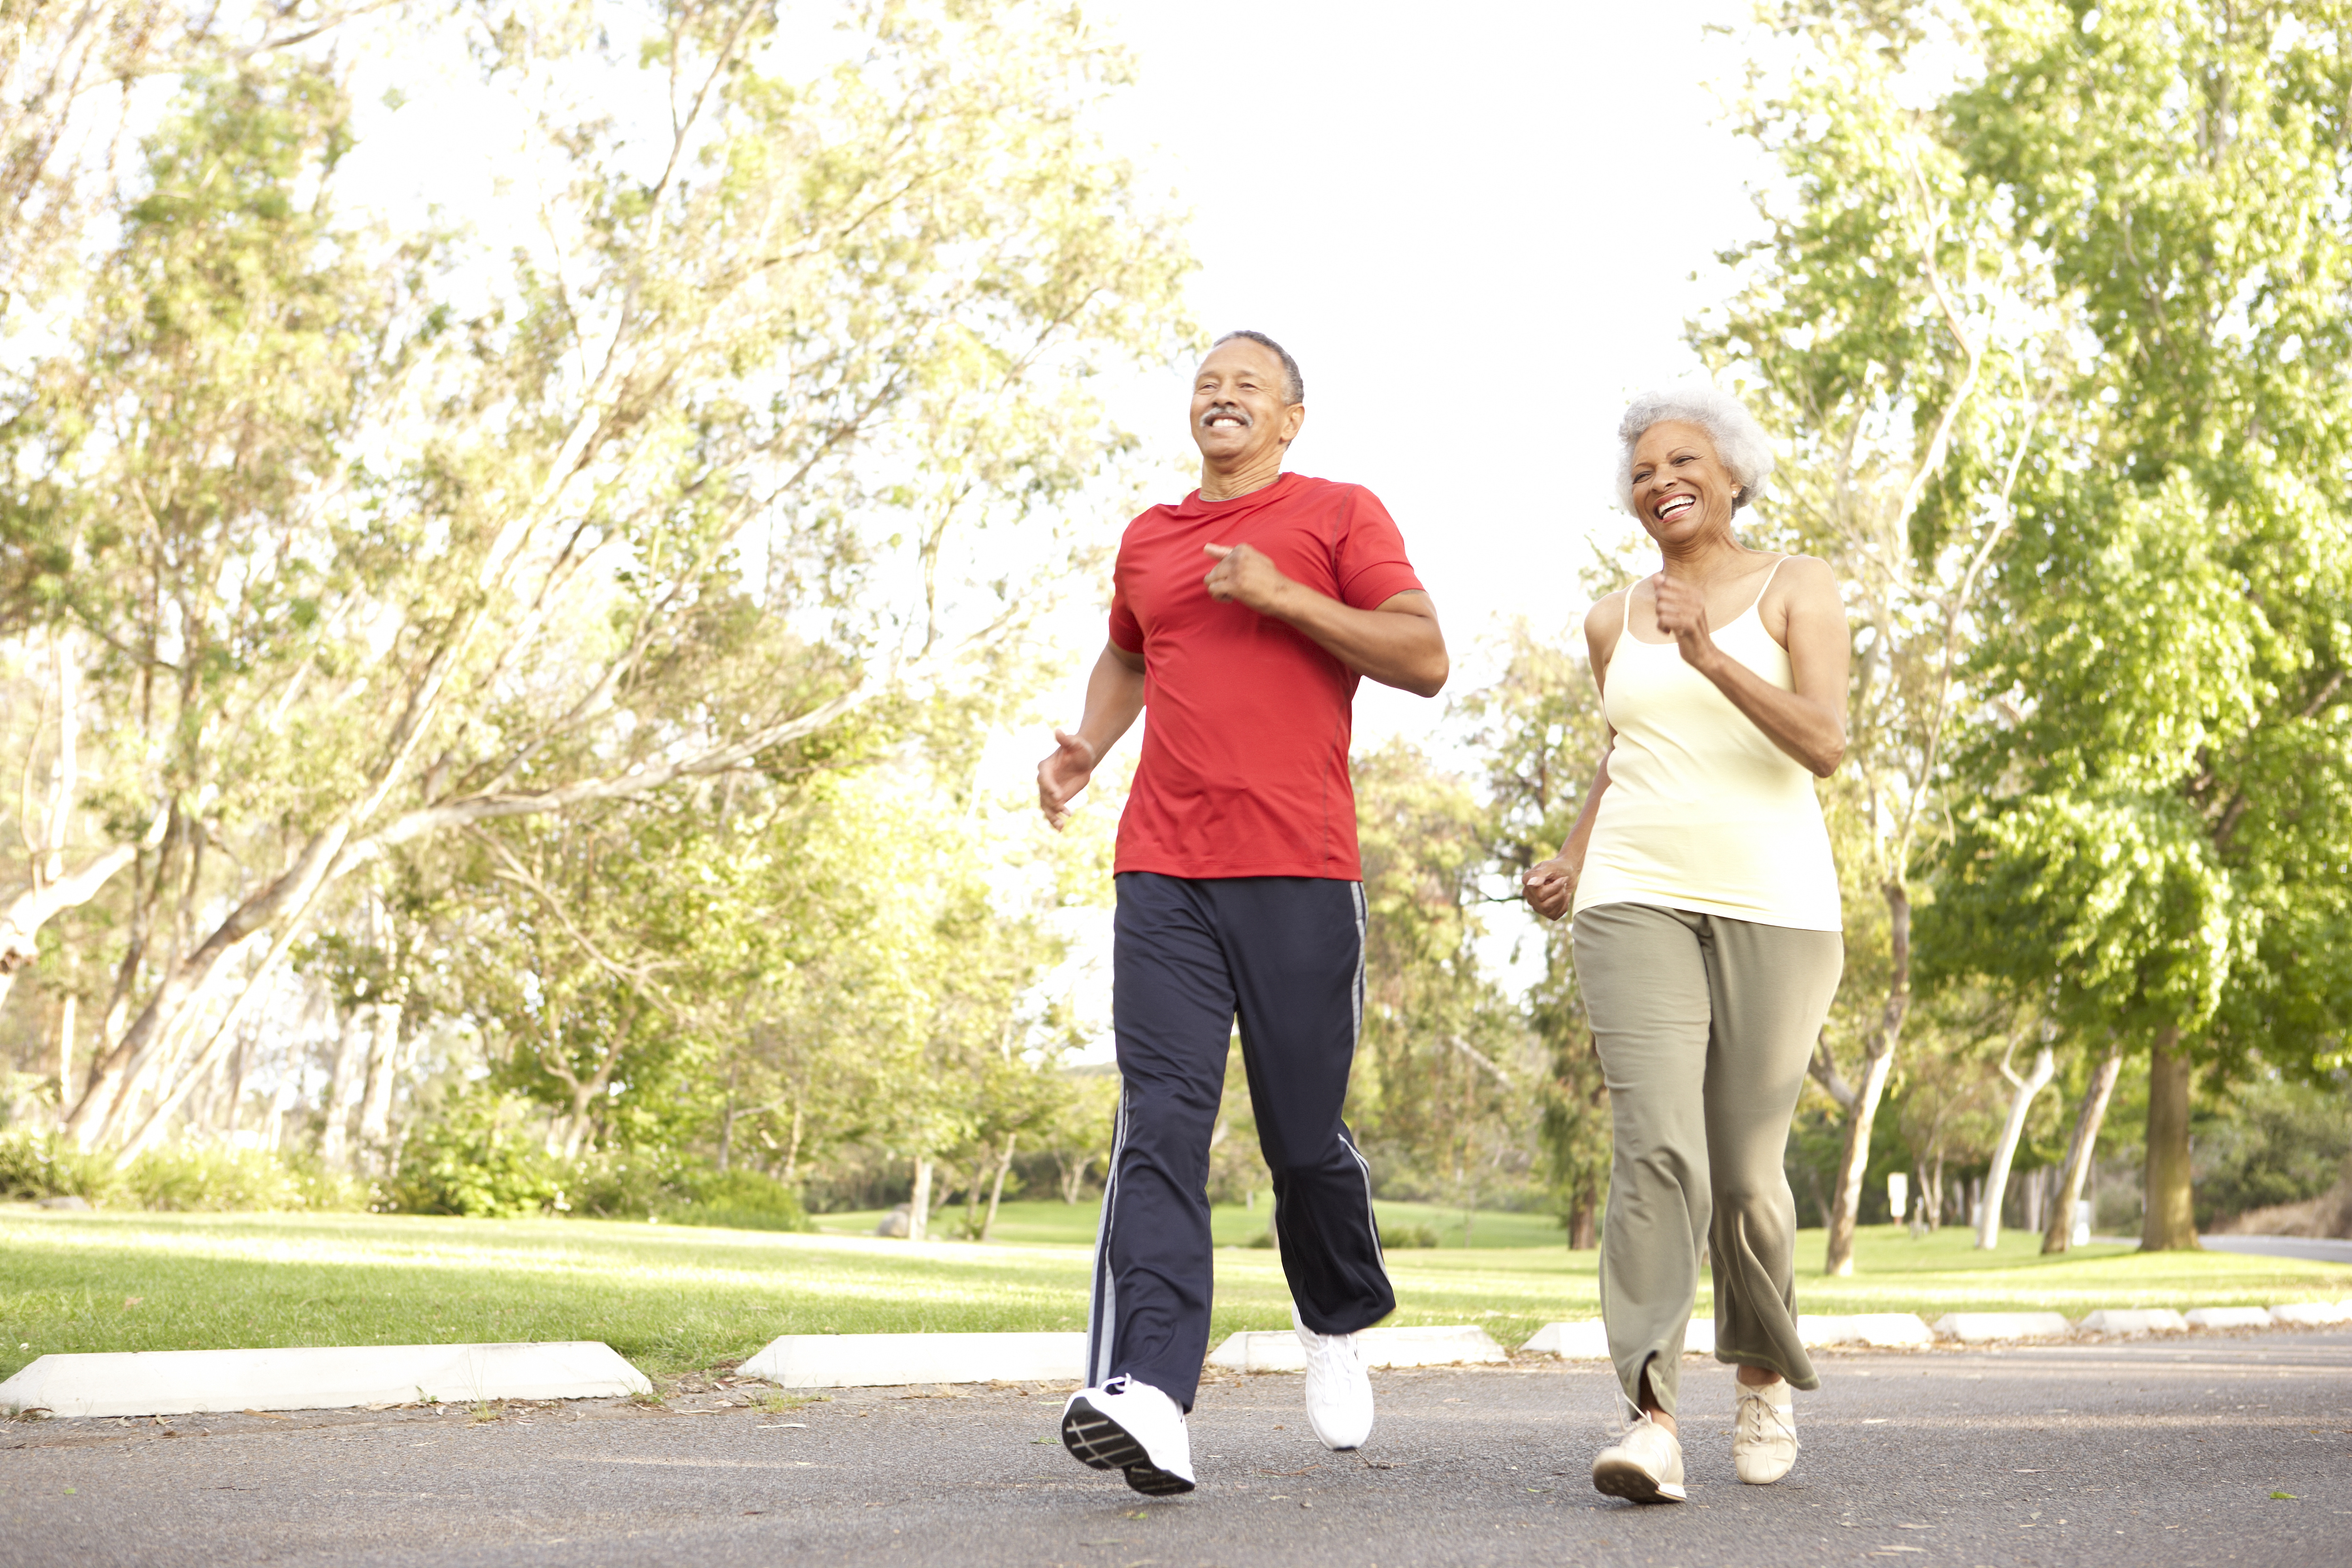 For a well-rounded exercise program, think in terms of a mix of activities to improve endurance, increase strength and maintain flexibility. And be creative. Walking, jogging, swimming and biking all fit the bill for moderate aerobic activities for endurance, but so do dancing, raking the lawn or playing badminton.